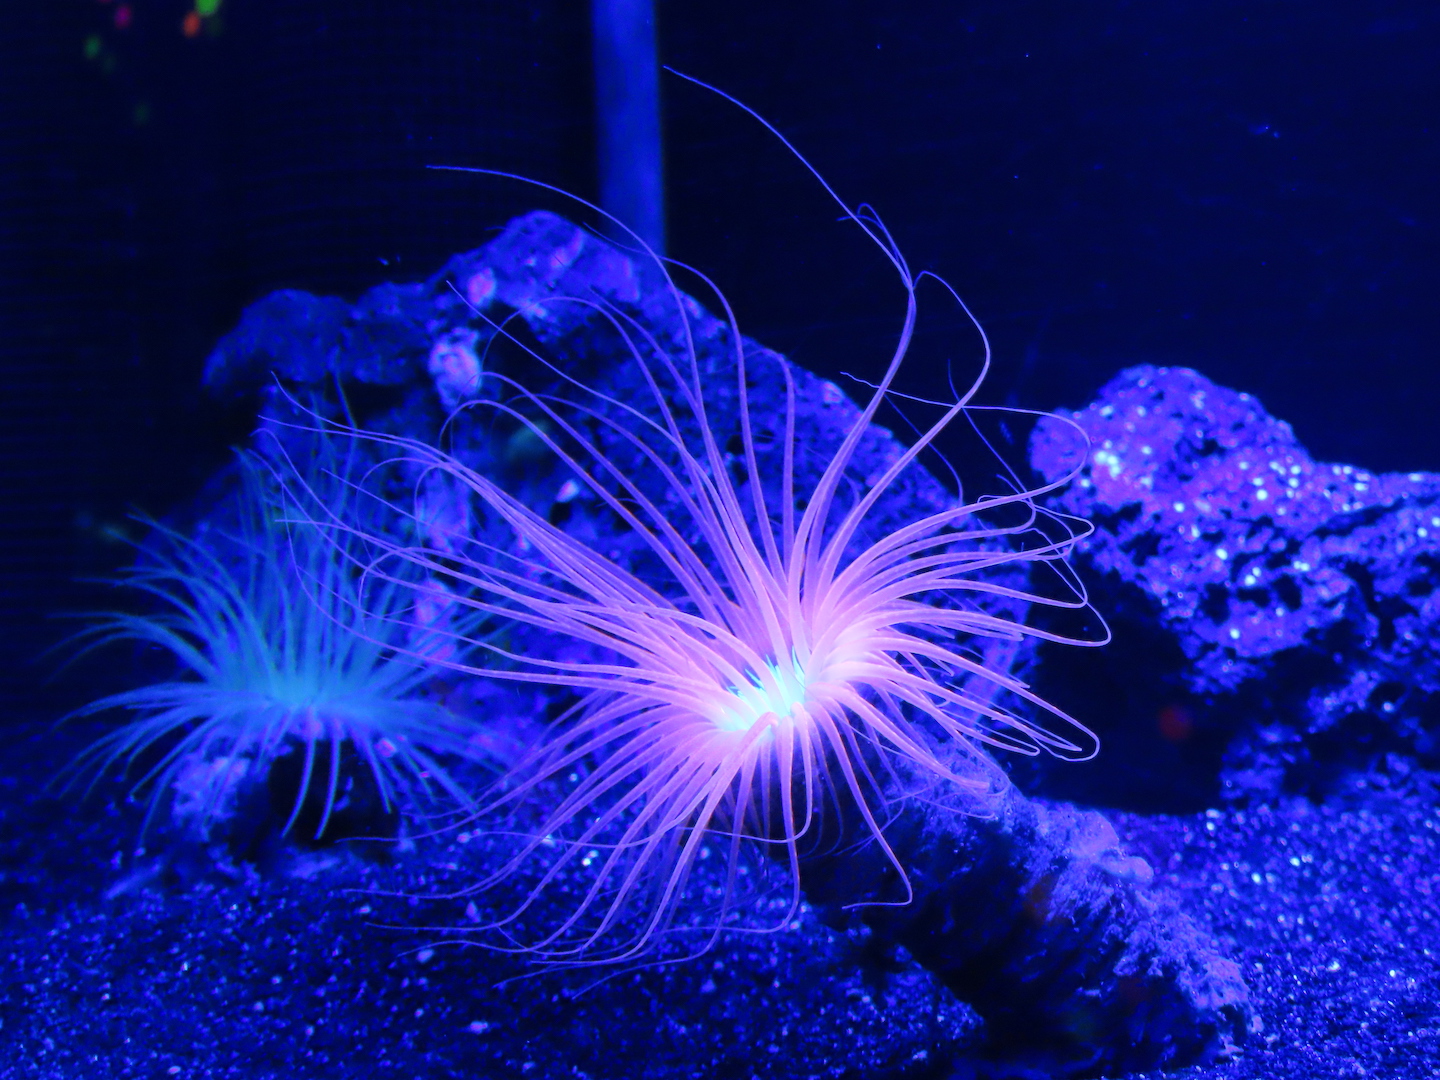 A kind of anemone that inhabits the western Atlantic. The figure swaying swaying under the black light is fantastic